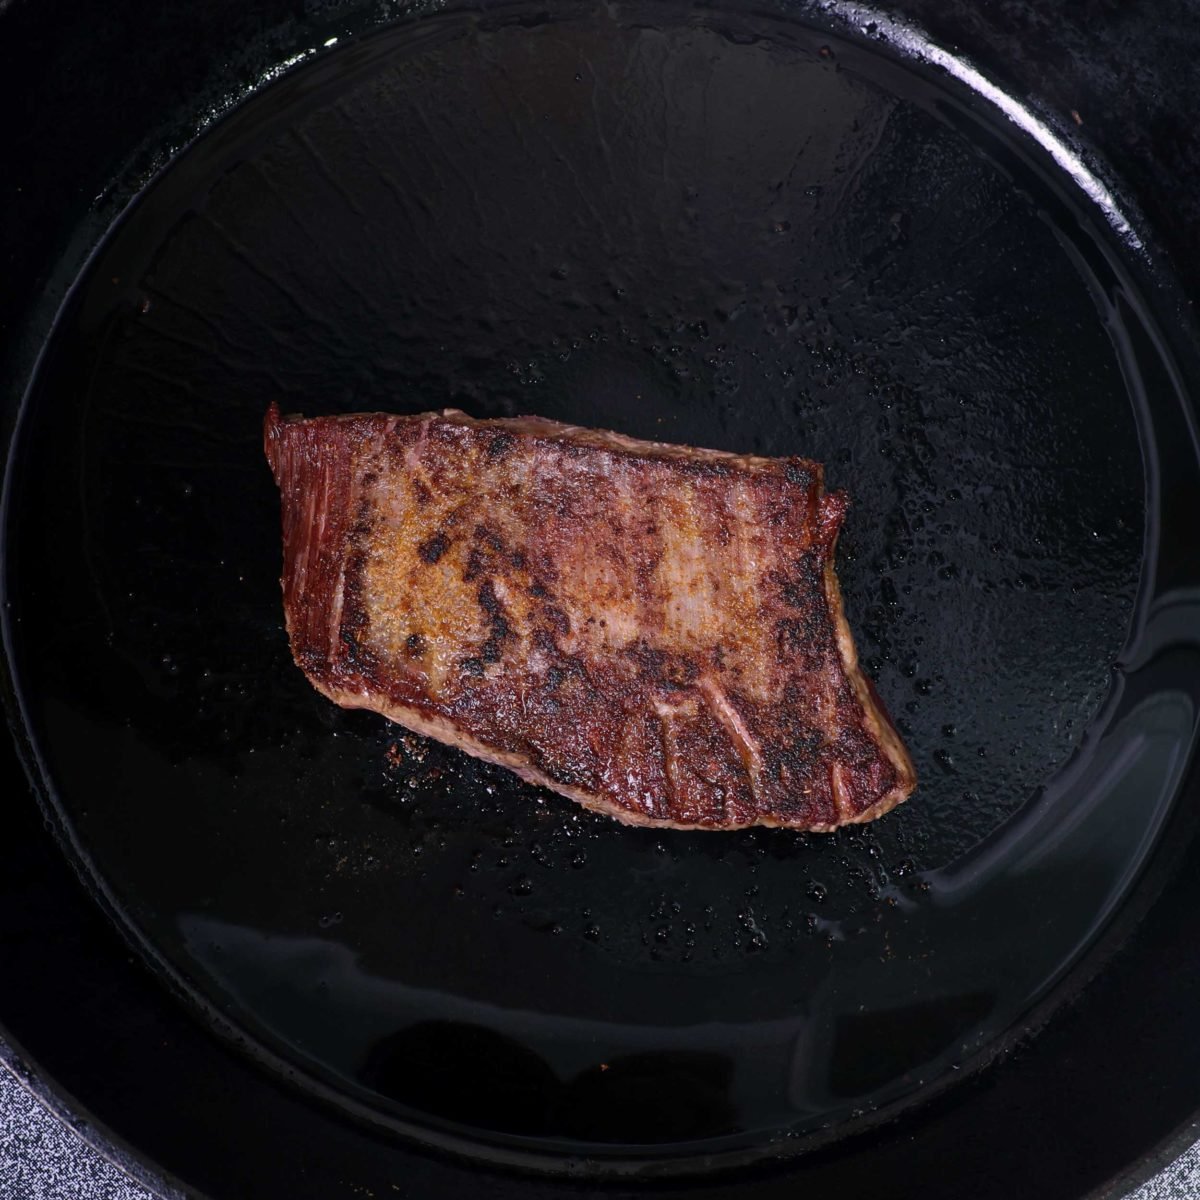 a small piece of steak cooking in a cast iron skillet.